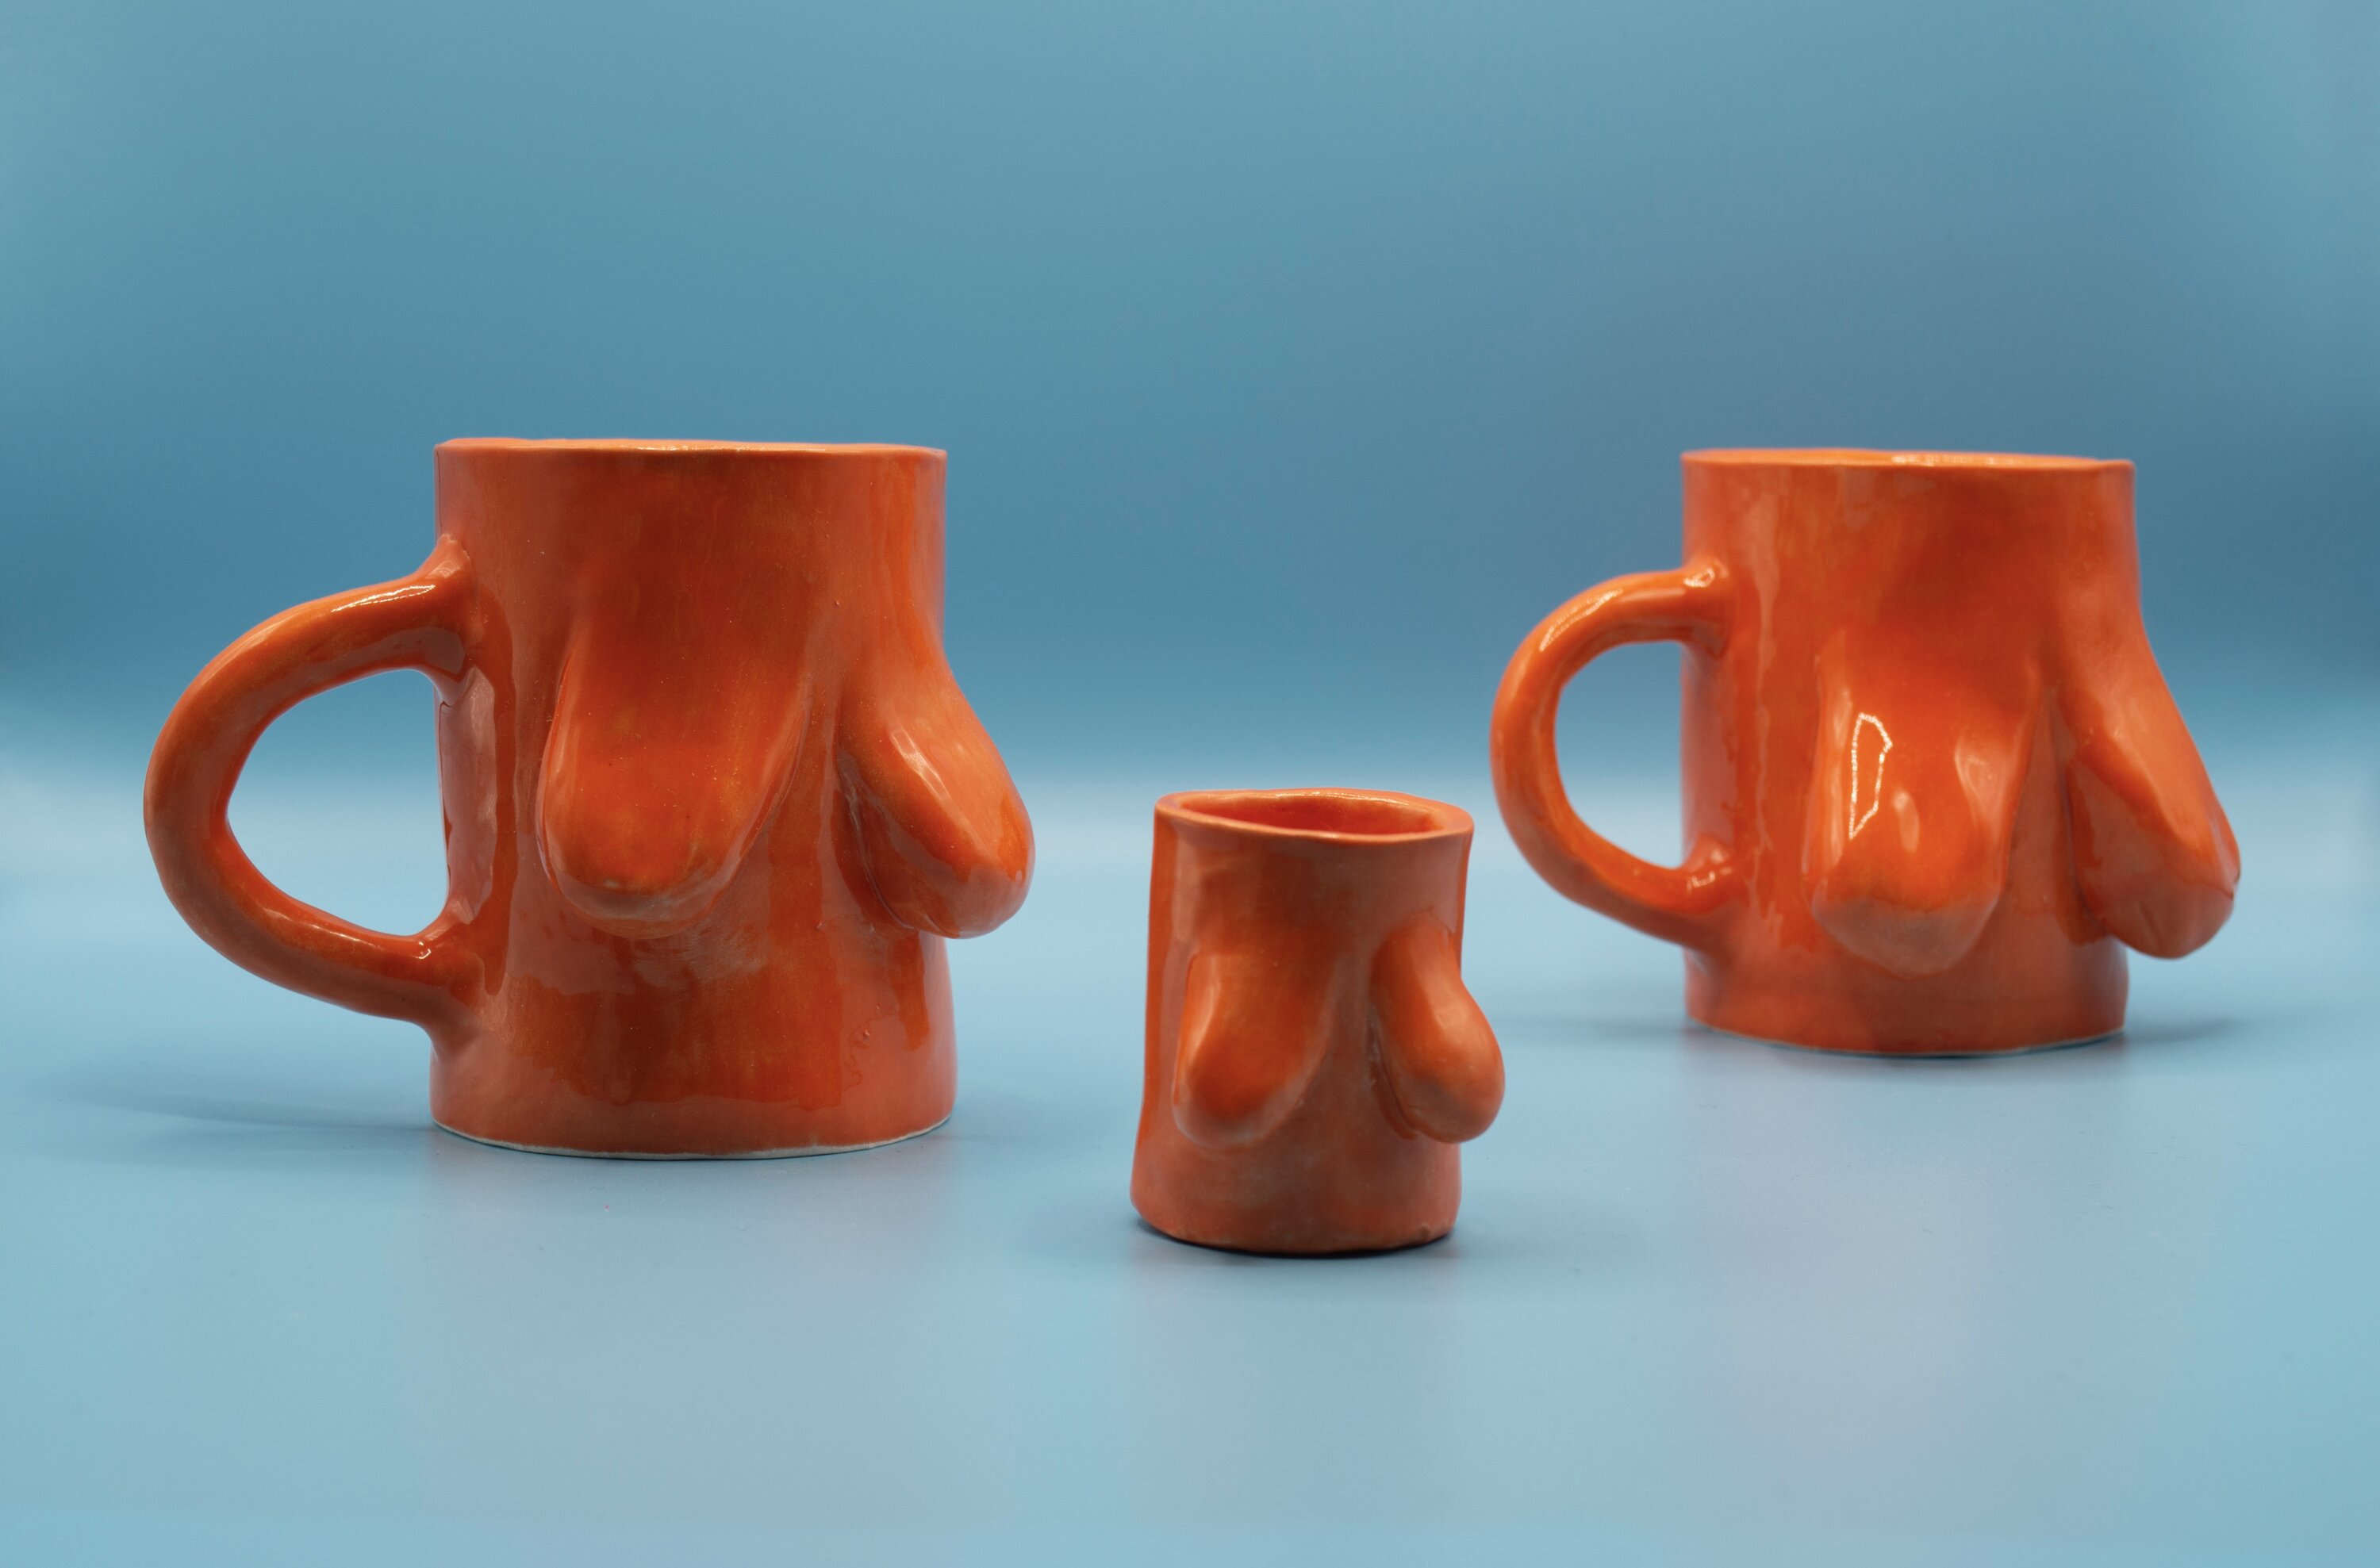 Two orange ceramic mugs and a shot glass in a blue background. Ceramics have breasts on them